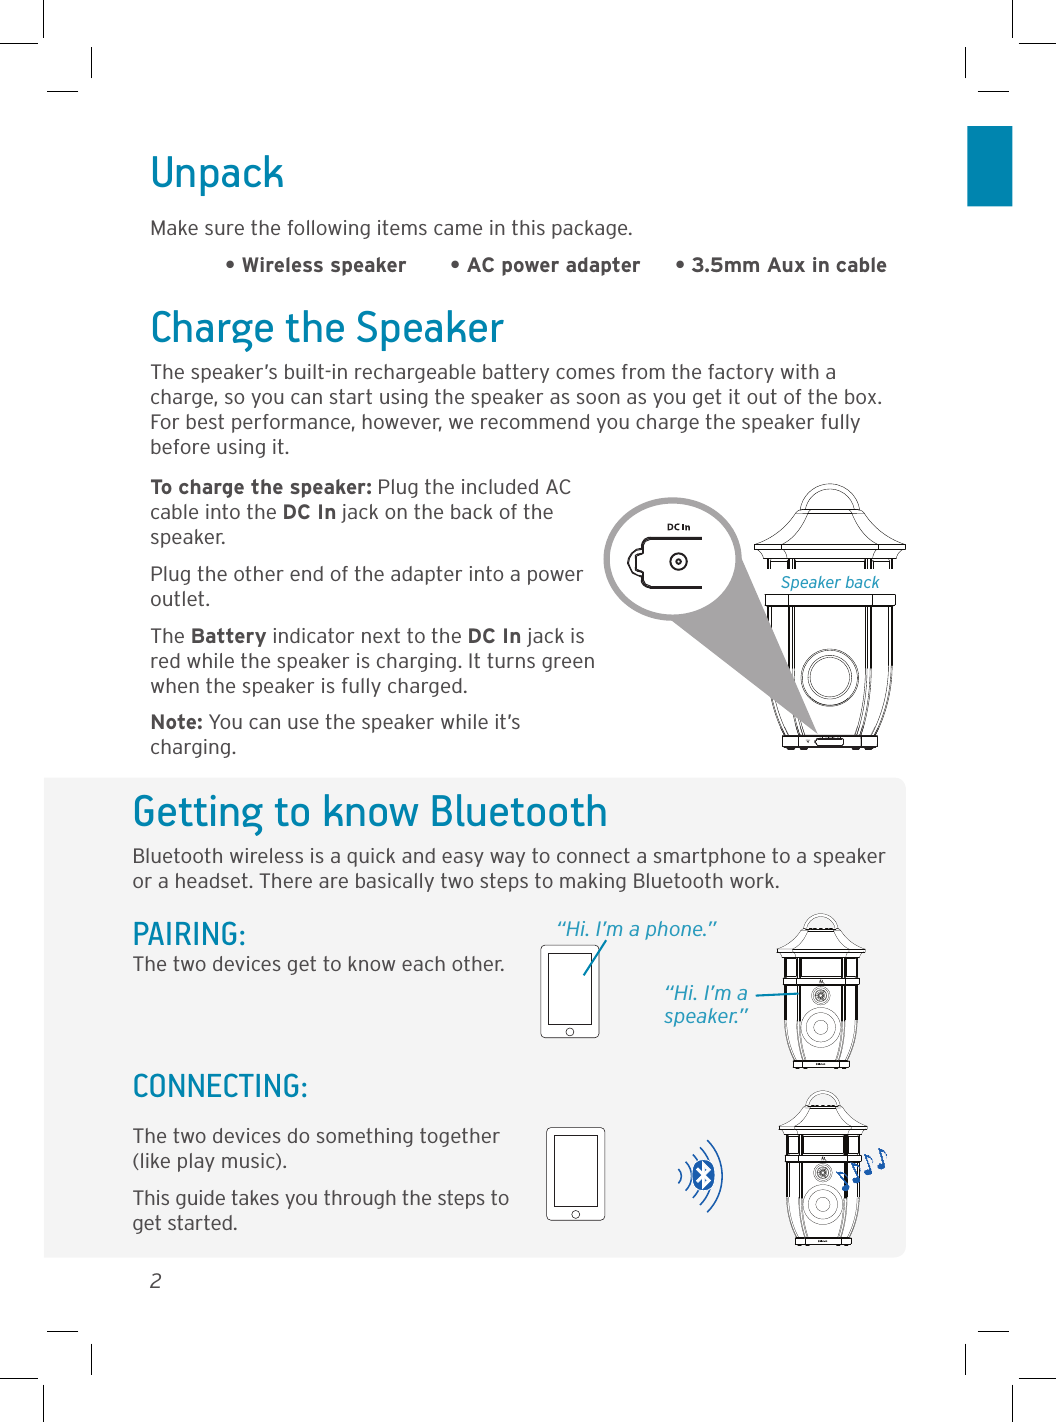 2Getting to know BluetoothBluetooth wireless is a quick and easy way to connect a smartphone to a speaker or a headset. There are basically two steps to making Bluetooth work.PAIRING:  “Hi. I’m a phone.”The two devices get to know each other.The two devices do something together (like play music).This guide takes you through the steps to get started.CONNECTING: “Hi. I’m a speaker.”UnpackMake sure the following items came in this package.  • Wireless speaker  • AC power adapter  • 3.5mm Aux in cableSpeaker backCharge the SpeakerThe speaker’s built-in rechargeable battery comes from the factory with a charge, so you can start using the speaker as soon as you get it out of the box. For best performance, however, we recommend you charge the speaker fully before using it.To charge the speaker: Plug the included AC cable into the DC In jack on the back of the speaker. Plug the other end of the adapter into a power outlet. The Battery indicator next to the DC In jack is red while the speaker is charging. It turns green when the speaker is fully charged. Note: You can use the speaker while it’s charging.